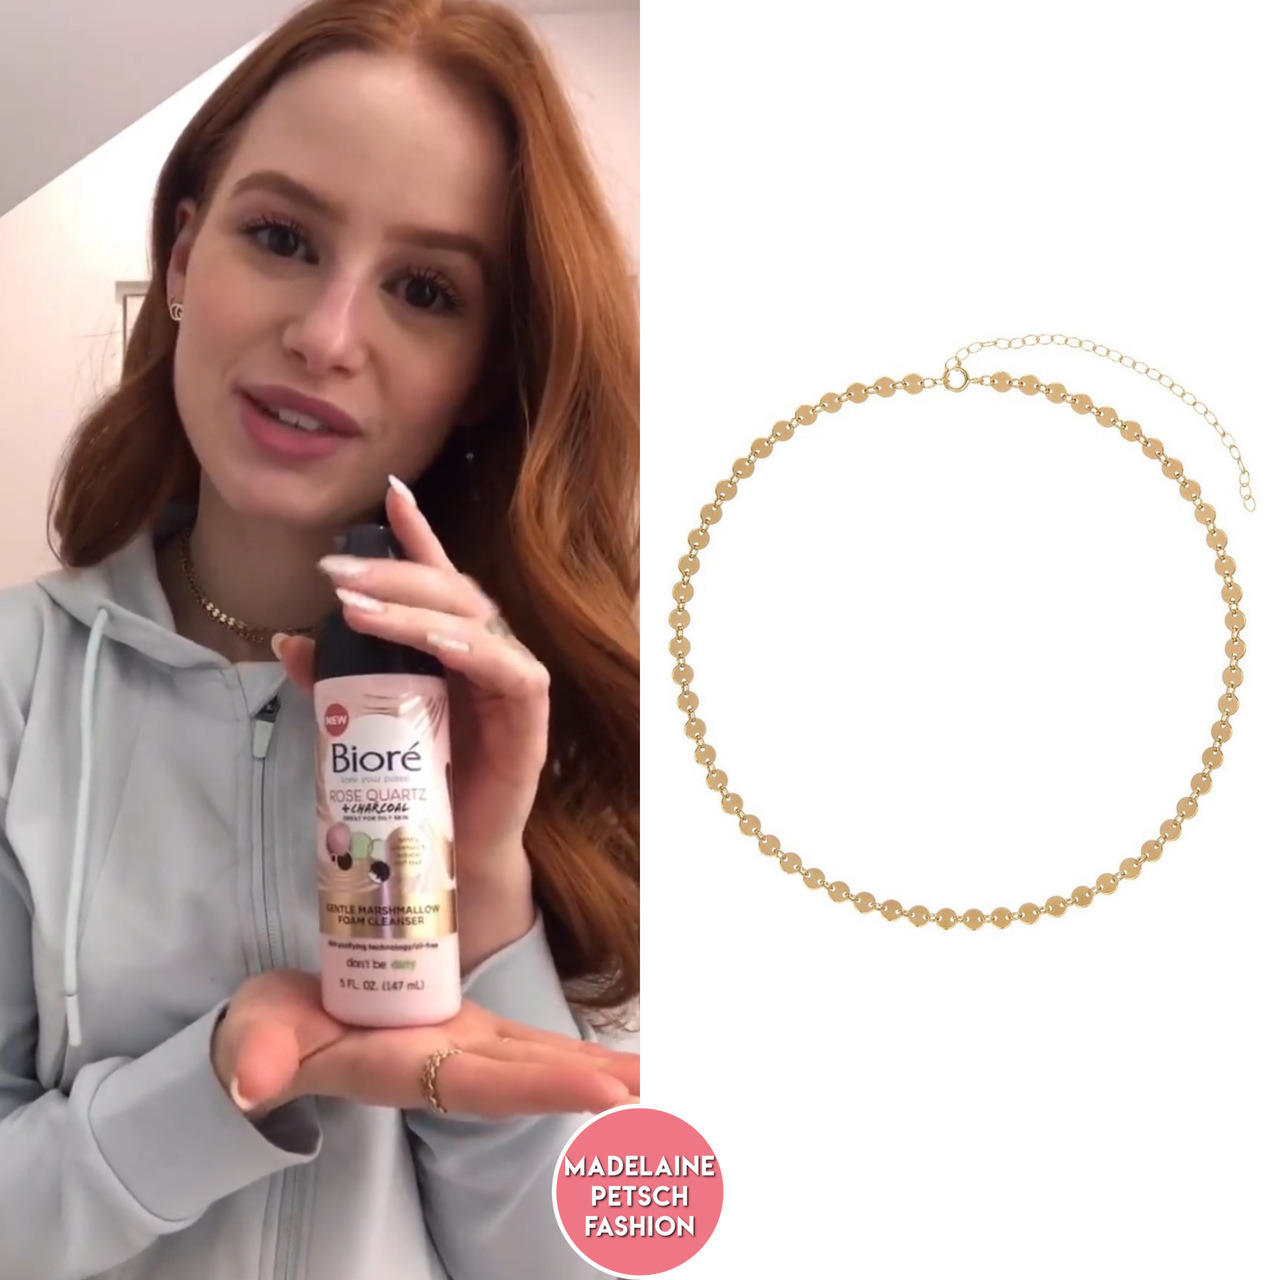 Madelaine Petsch Fashion — Instagram Story. Madelaine wore the